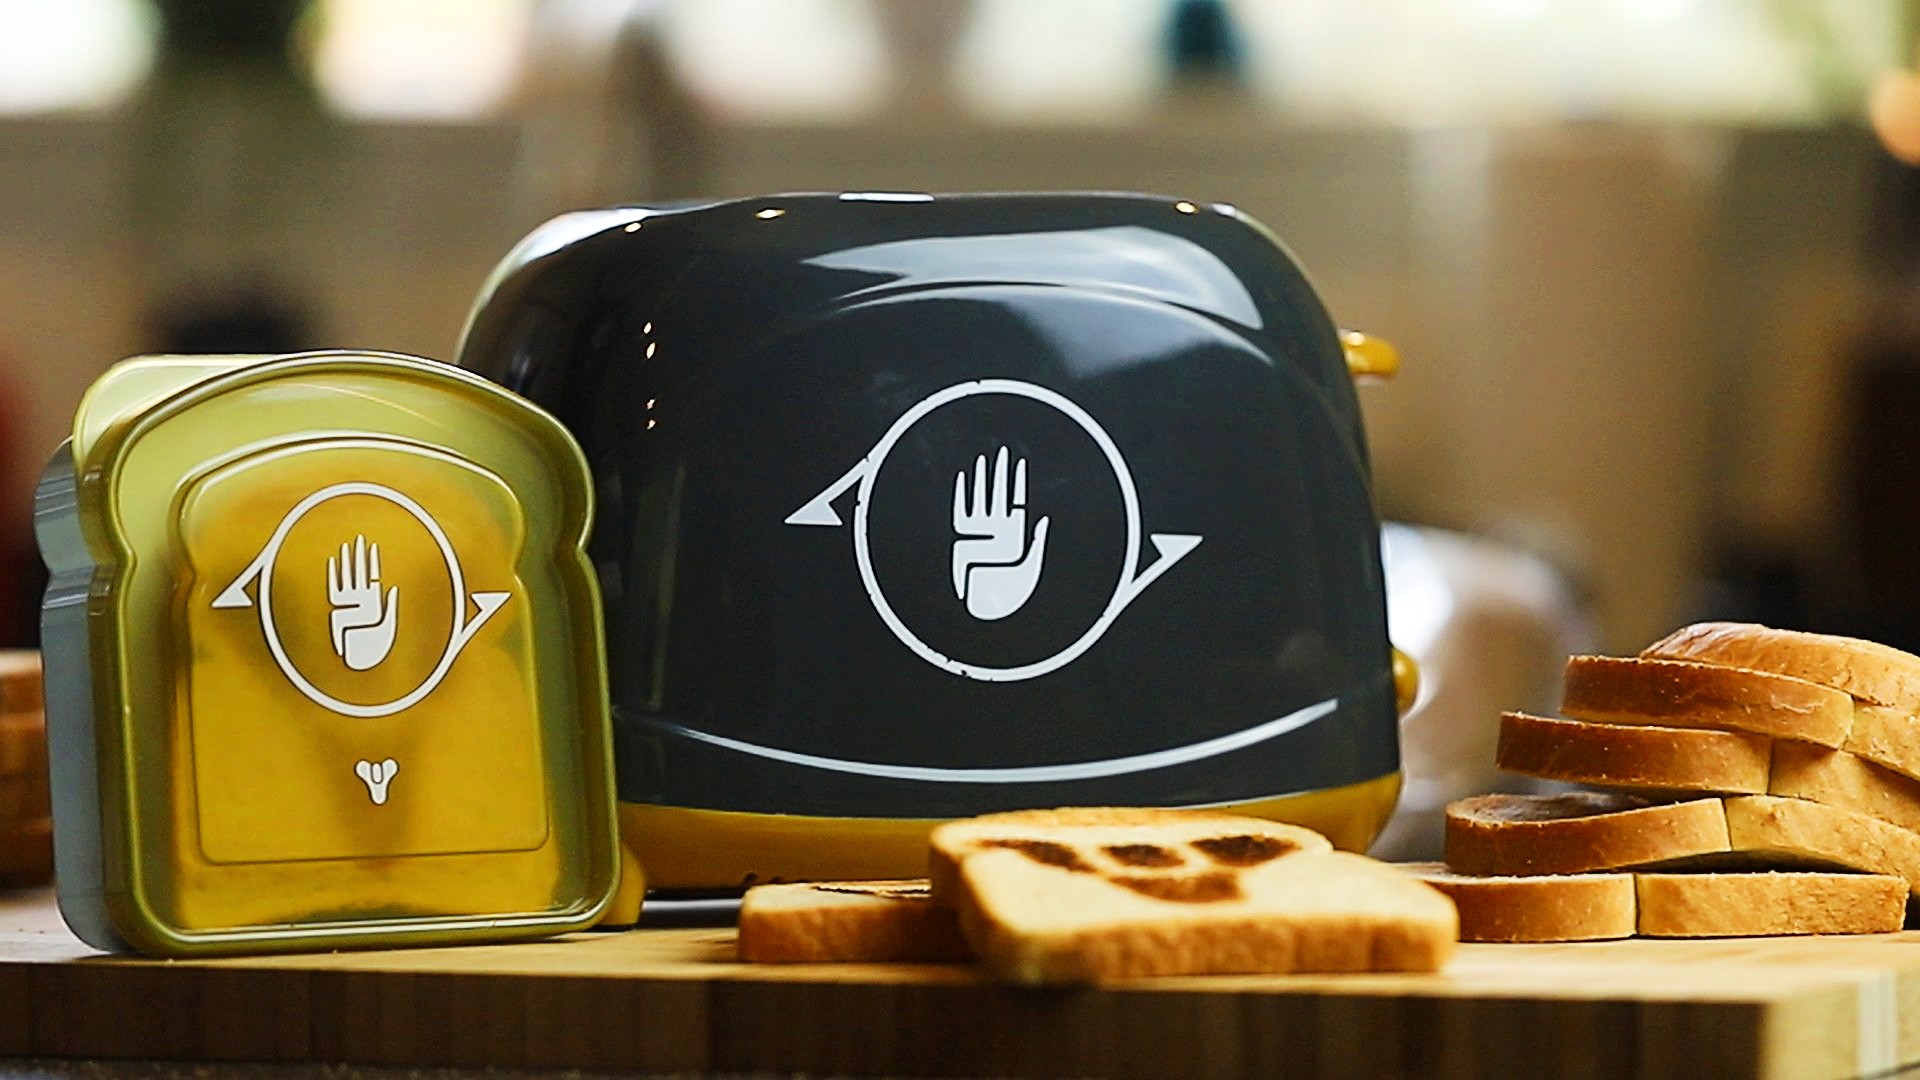 This Destiny 2 toaster could be yours for $84.99